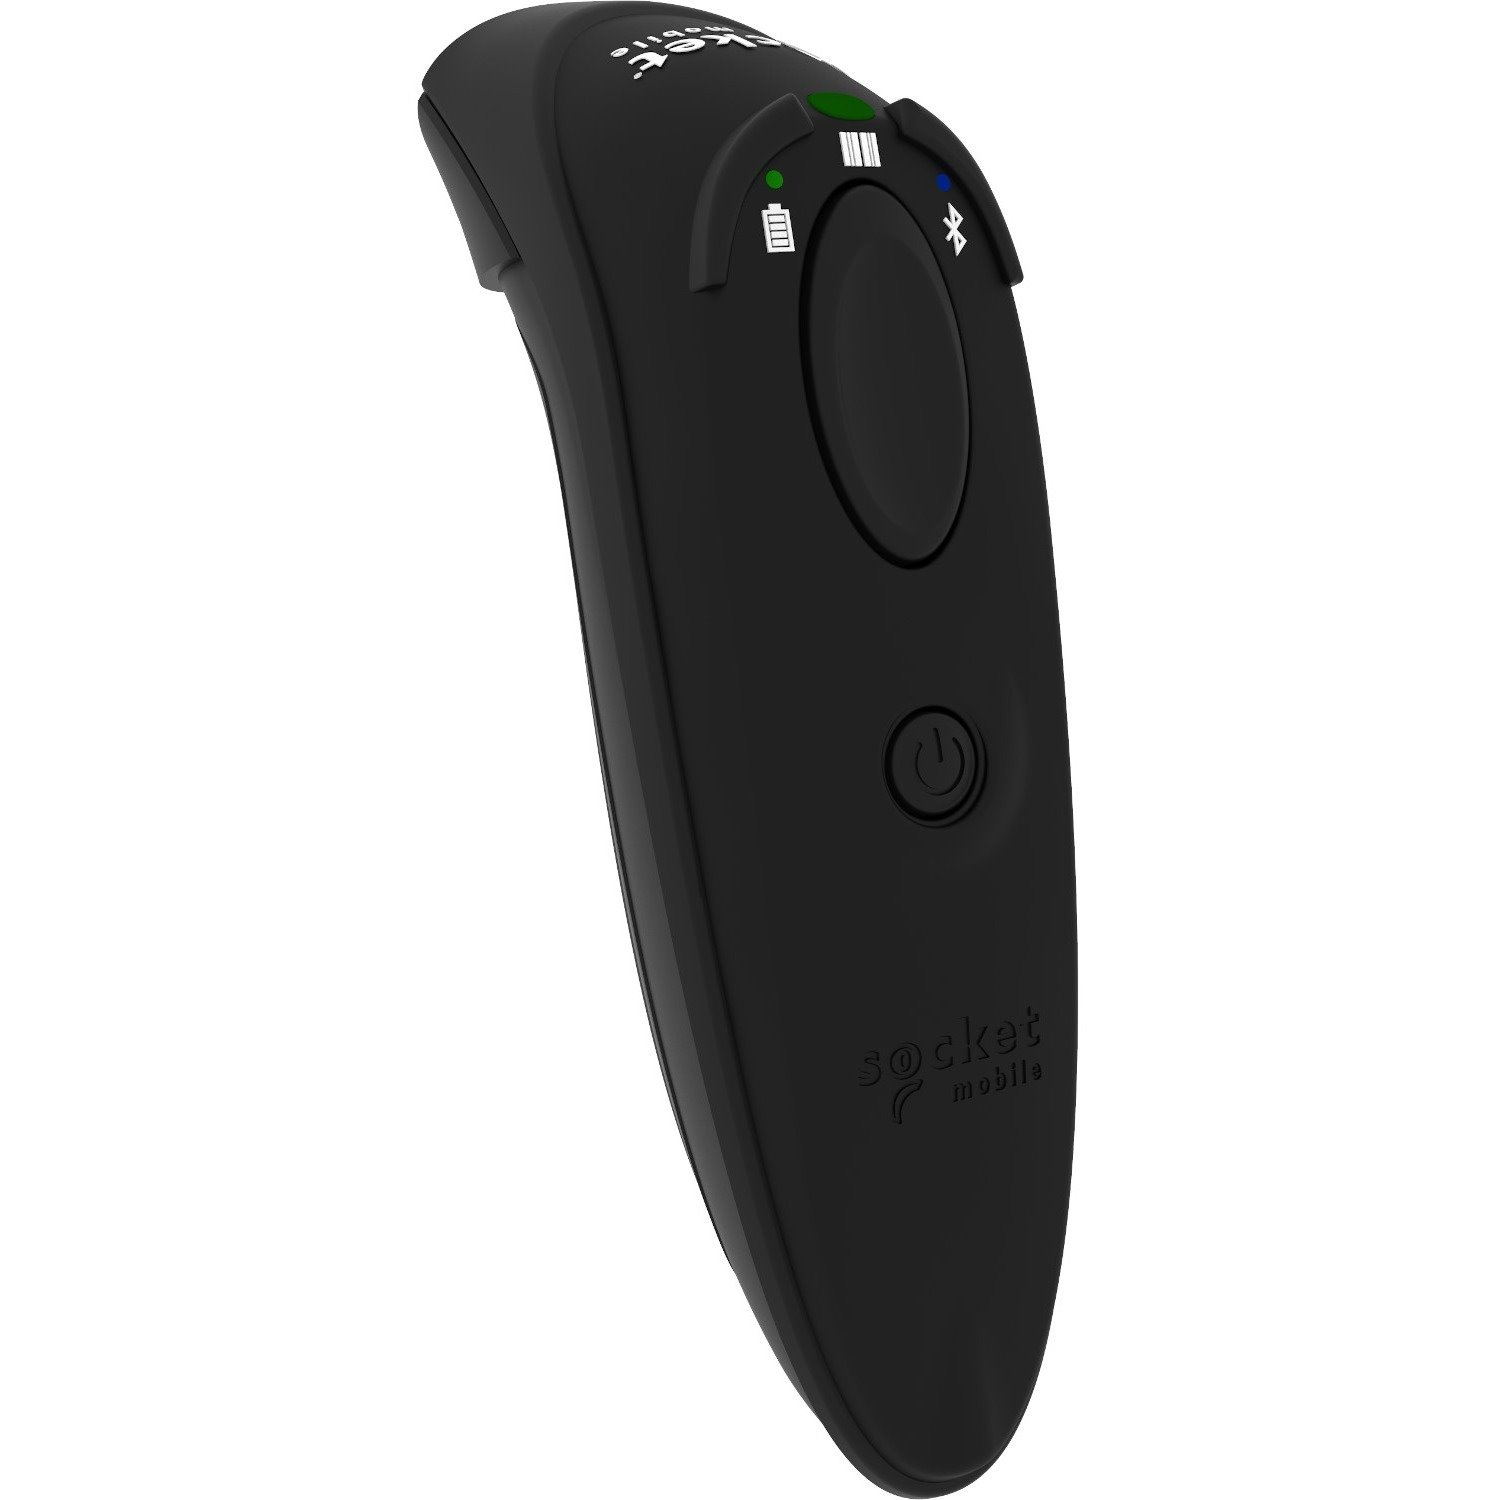 Socket Mobile DuraScan D720 Rugged Retail, Transportation, Warehouse, Manufacturing, Field Sales/Service, Healthcare, Asset Tracking, Warehouse Handheld Barcode Scanner - Wireless Connectivity - Black